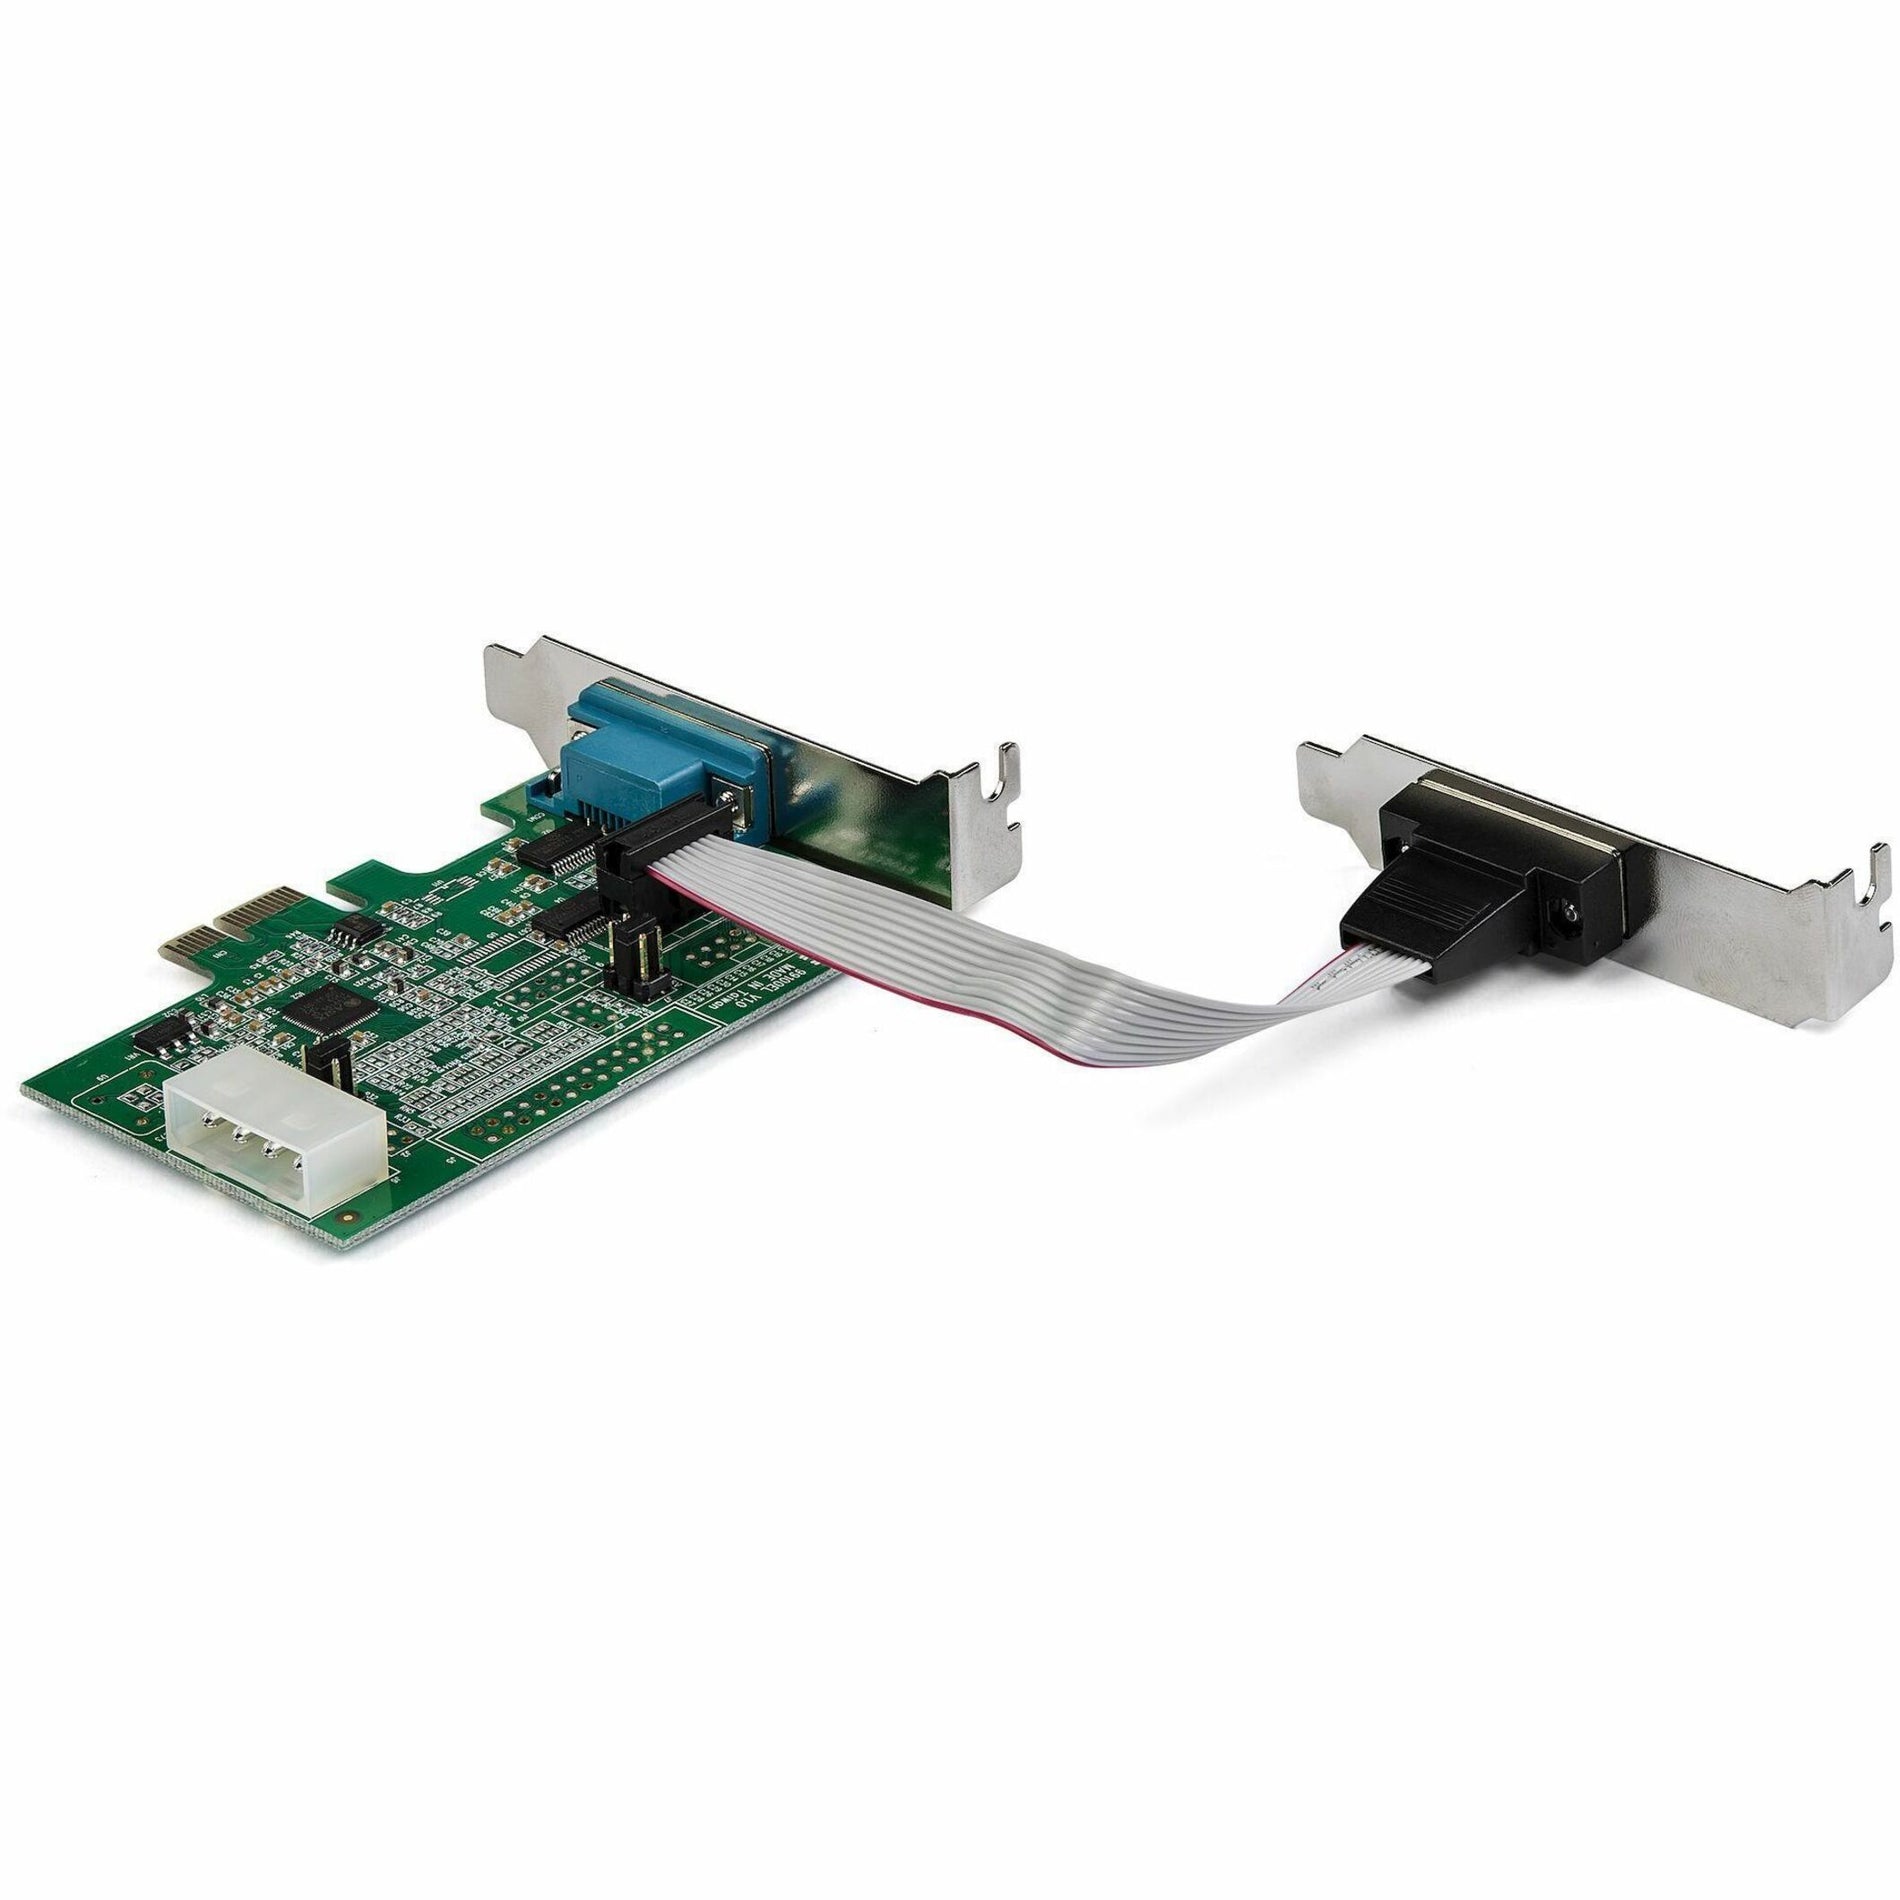 StarTech.com PEX2S953LP 2-Port RS232 Serial Adapter Card with 16950 UART, Low-profile, PCI Express